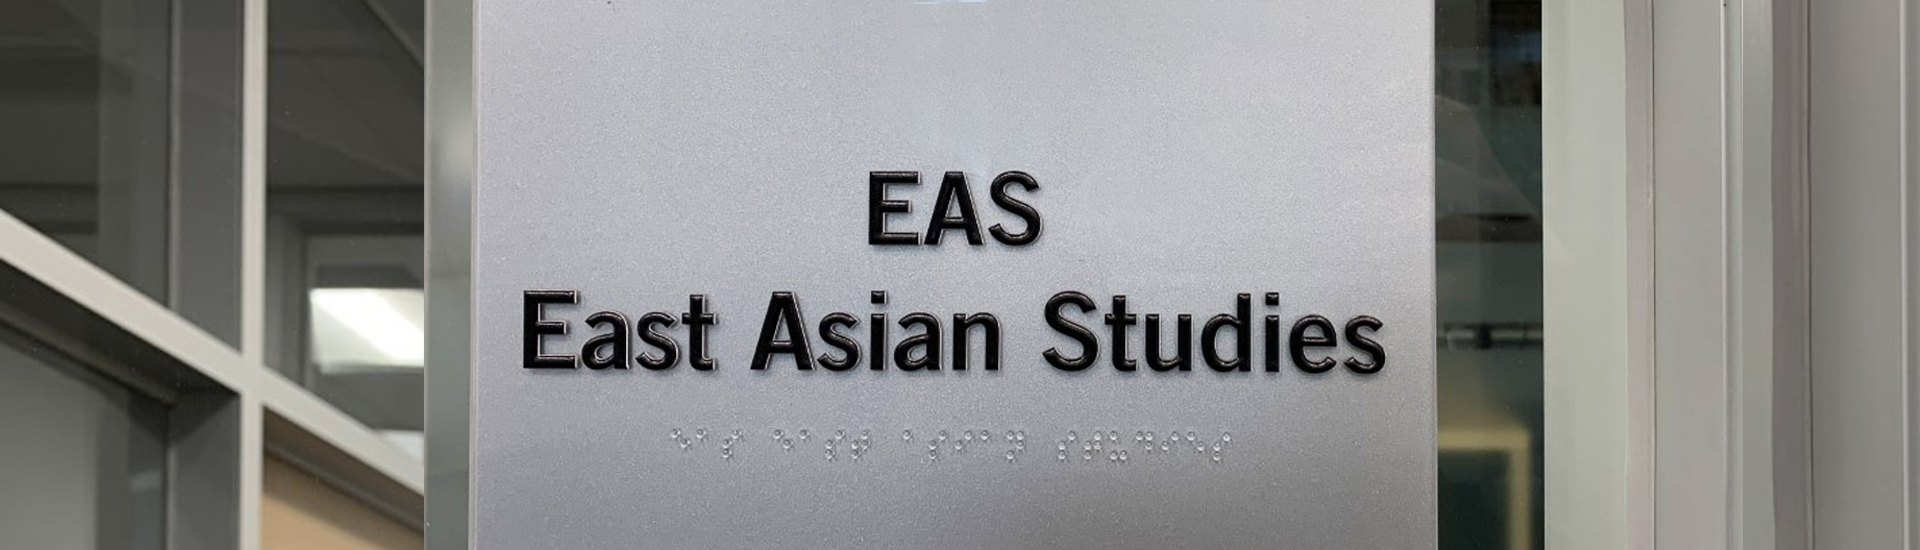 The phrase, "EAS - East Asian Studies," on a metal plate that is tacked onto a glass wall.